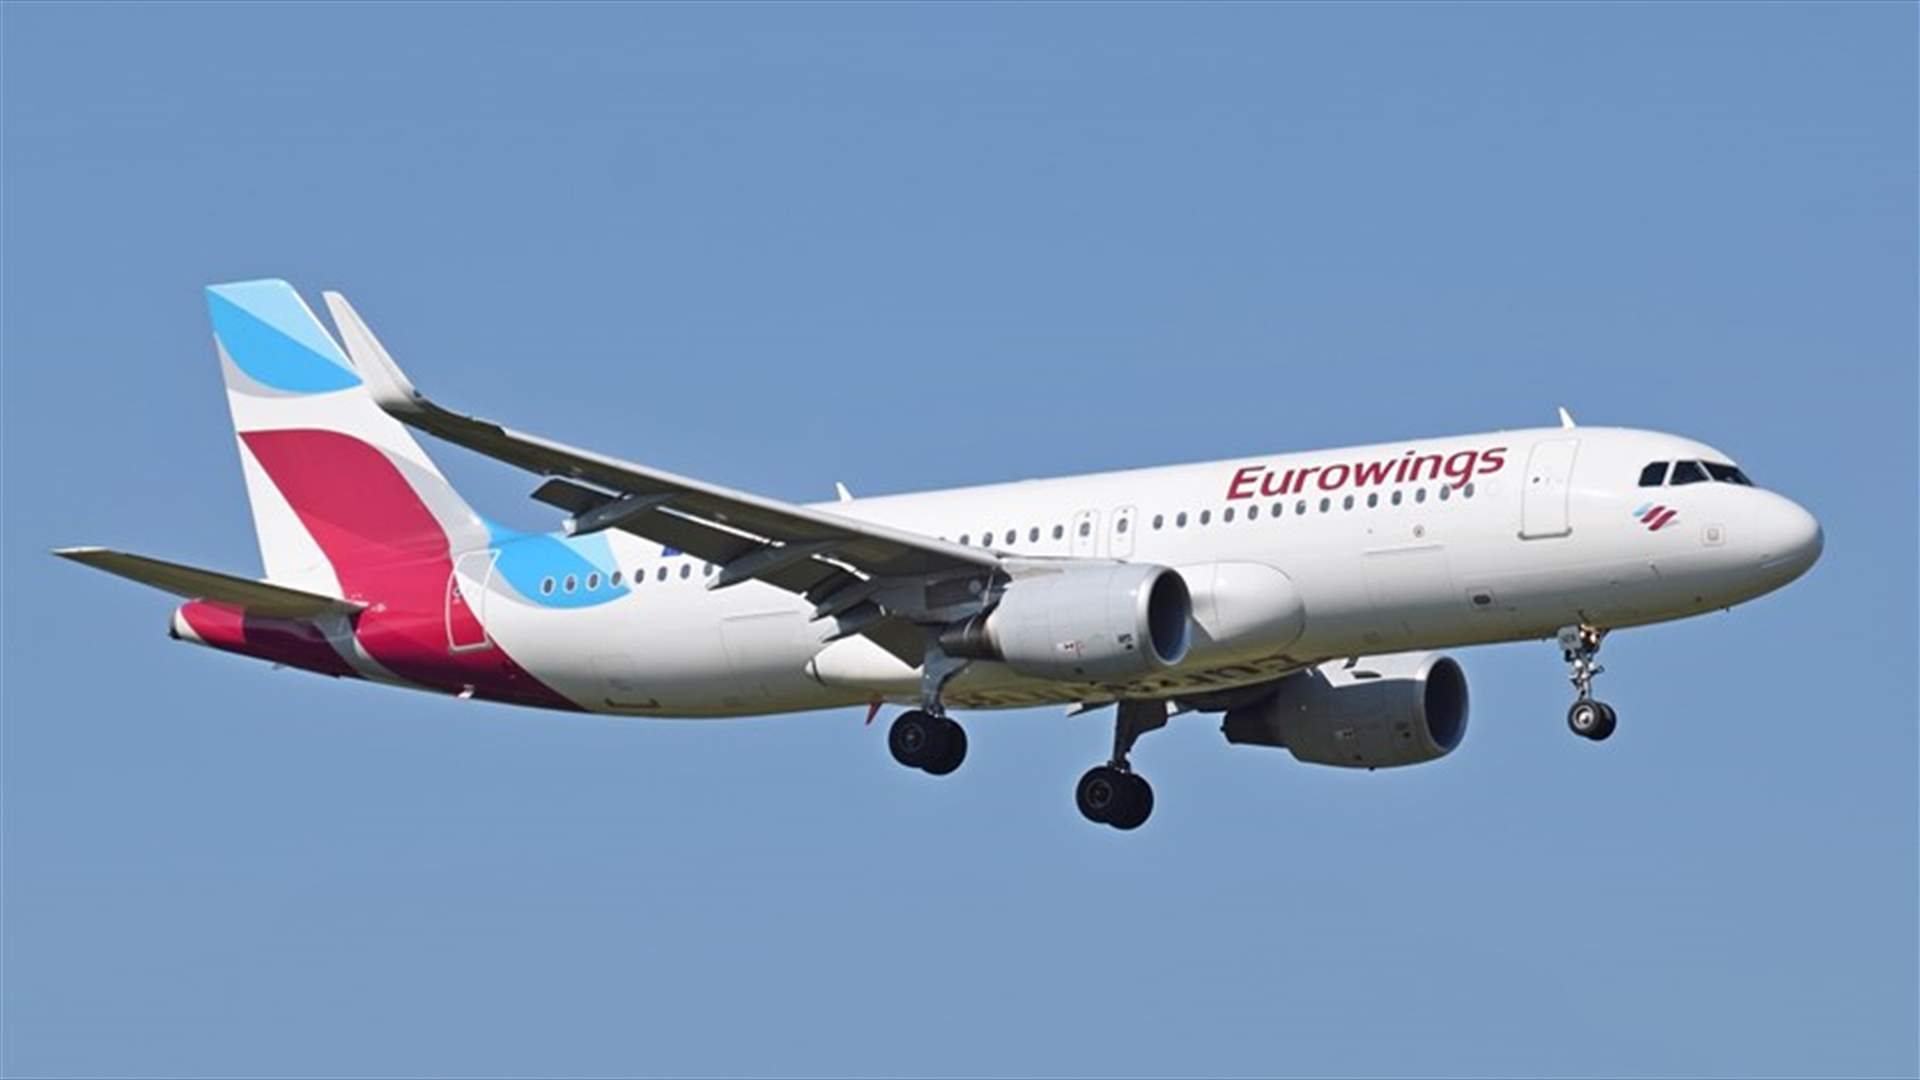 Kuwait says Germany-bound Eurowings flight lands over bomb scare